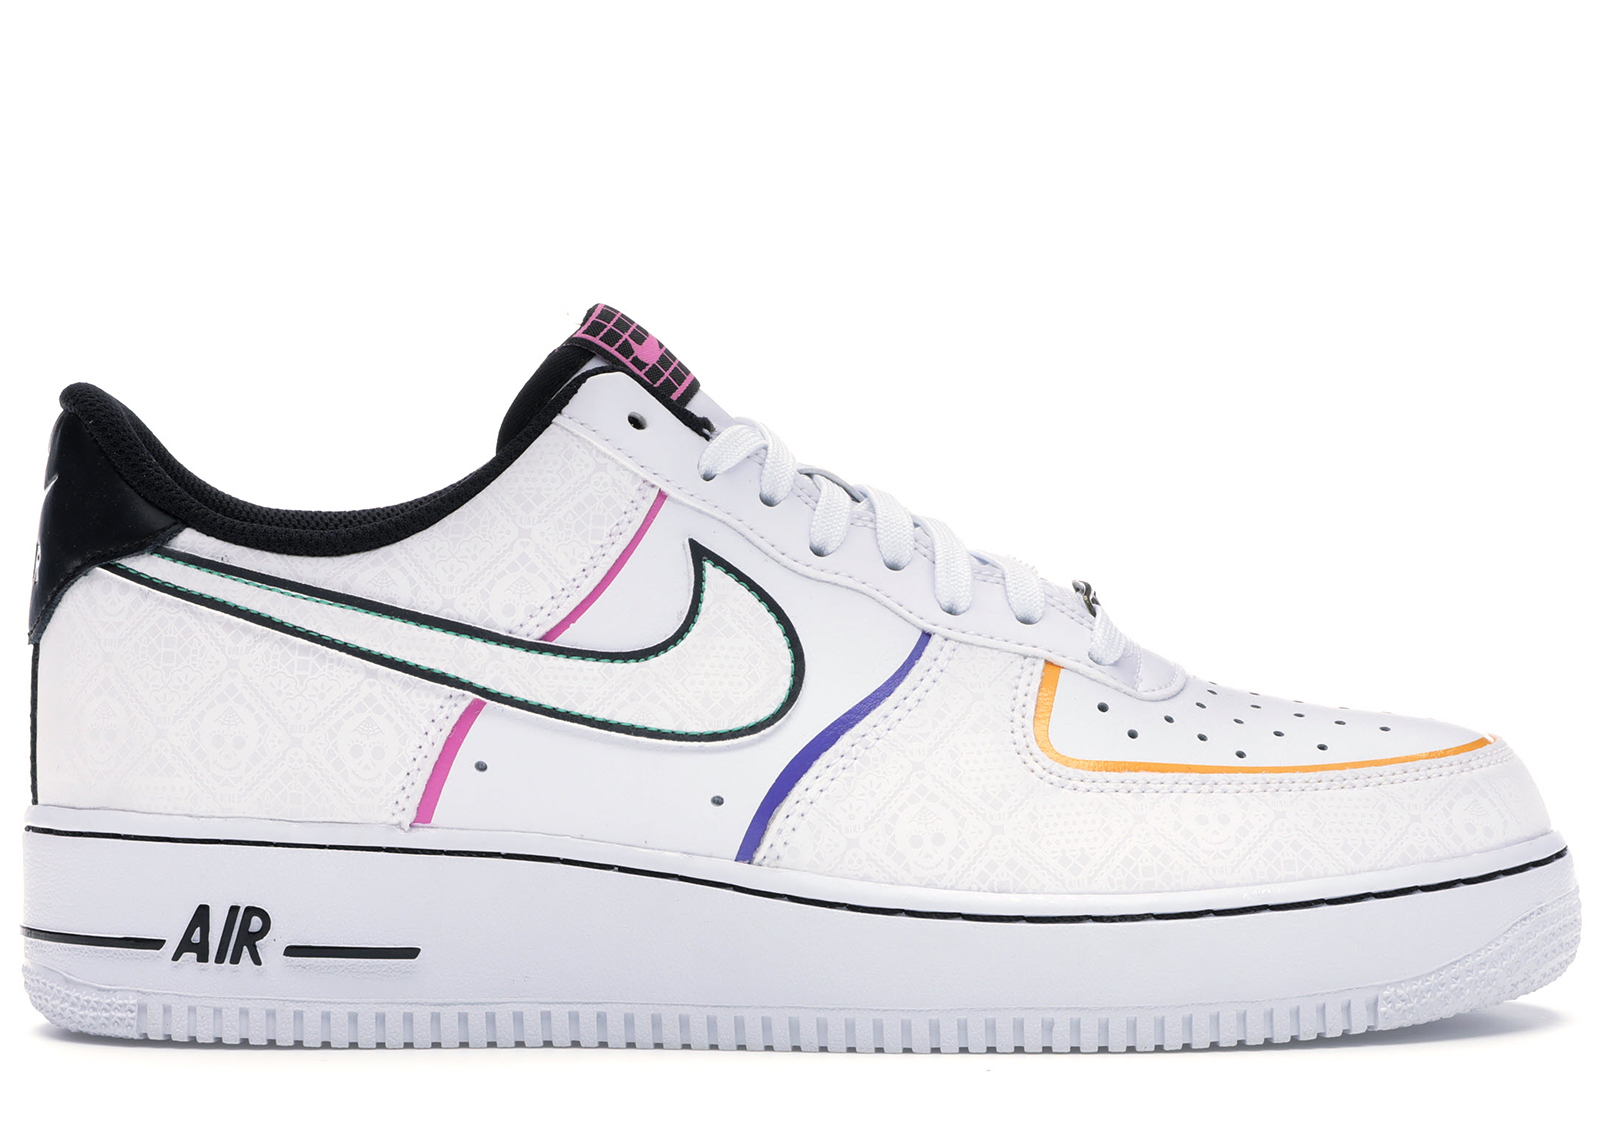 Nike Air Force 1 Low Day of the Dead (2019)